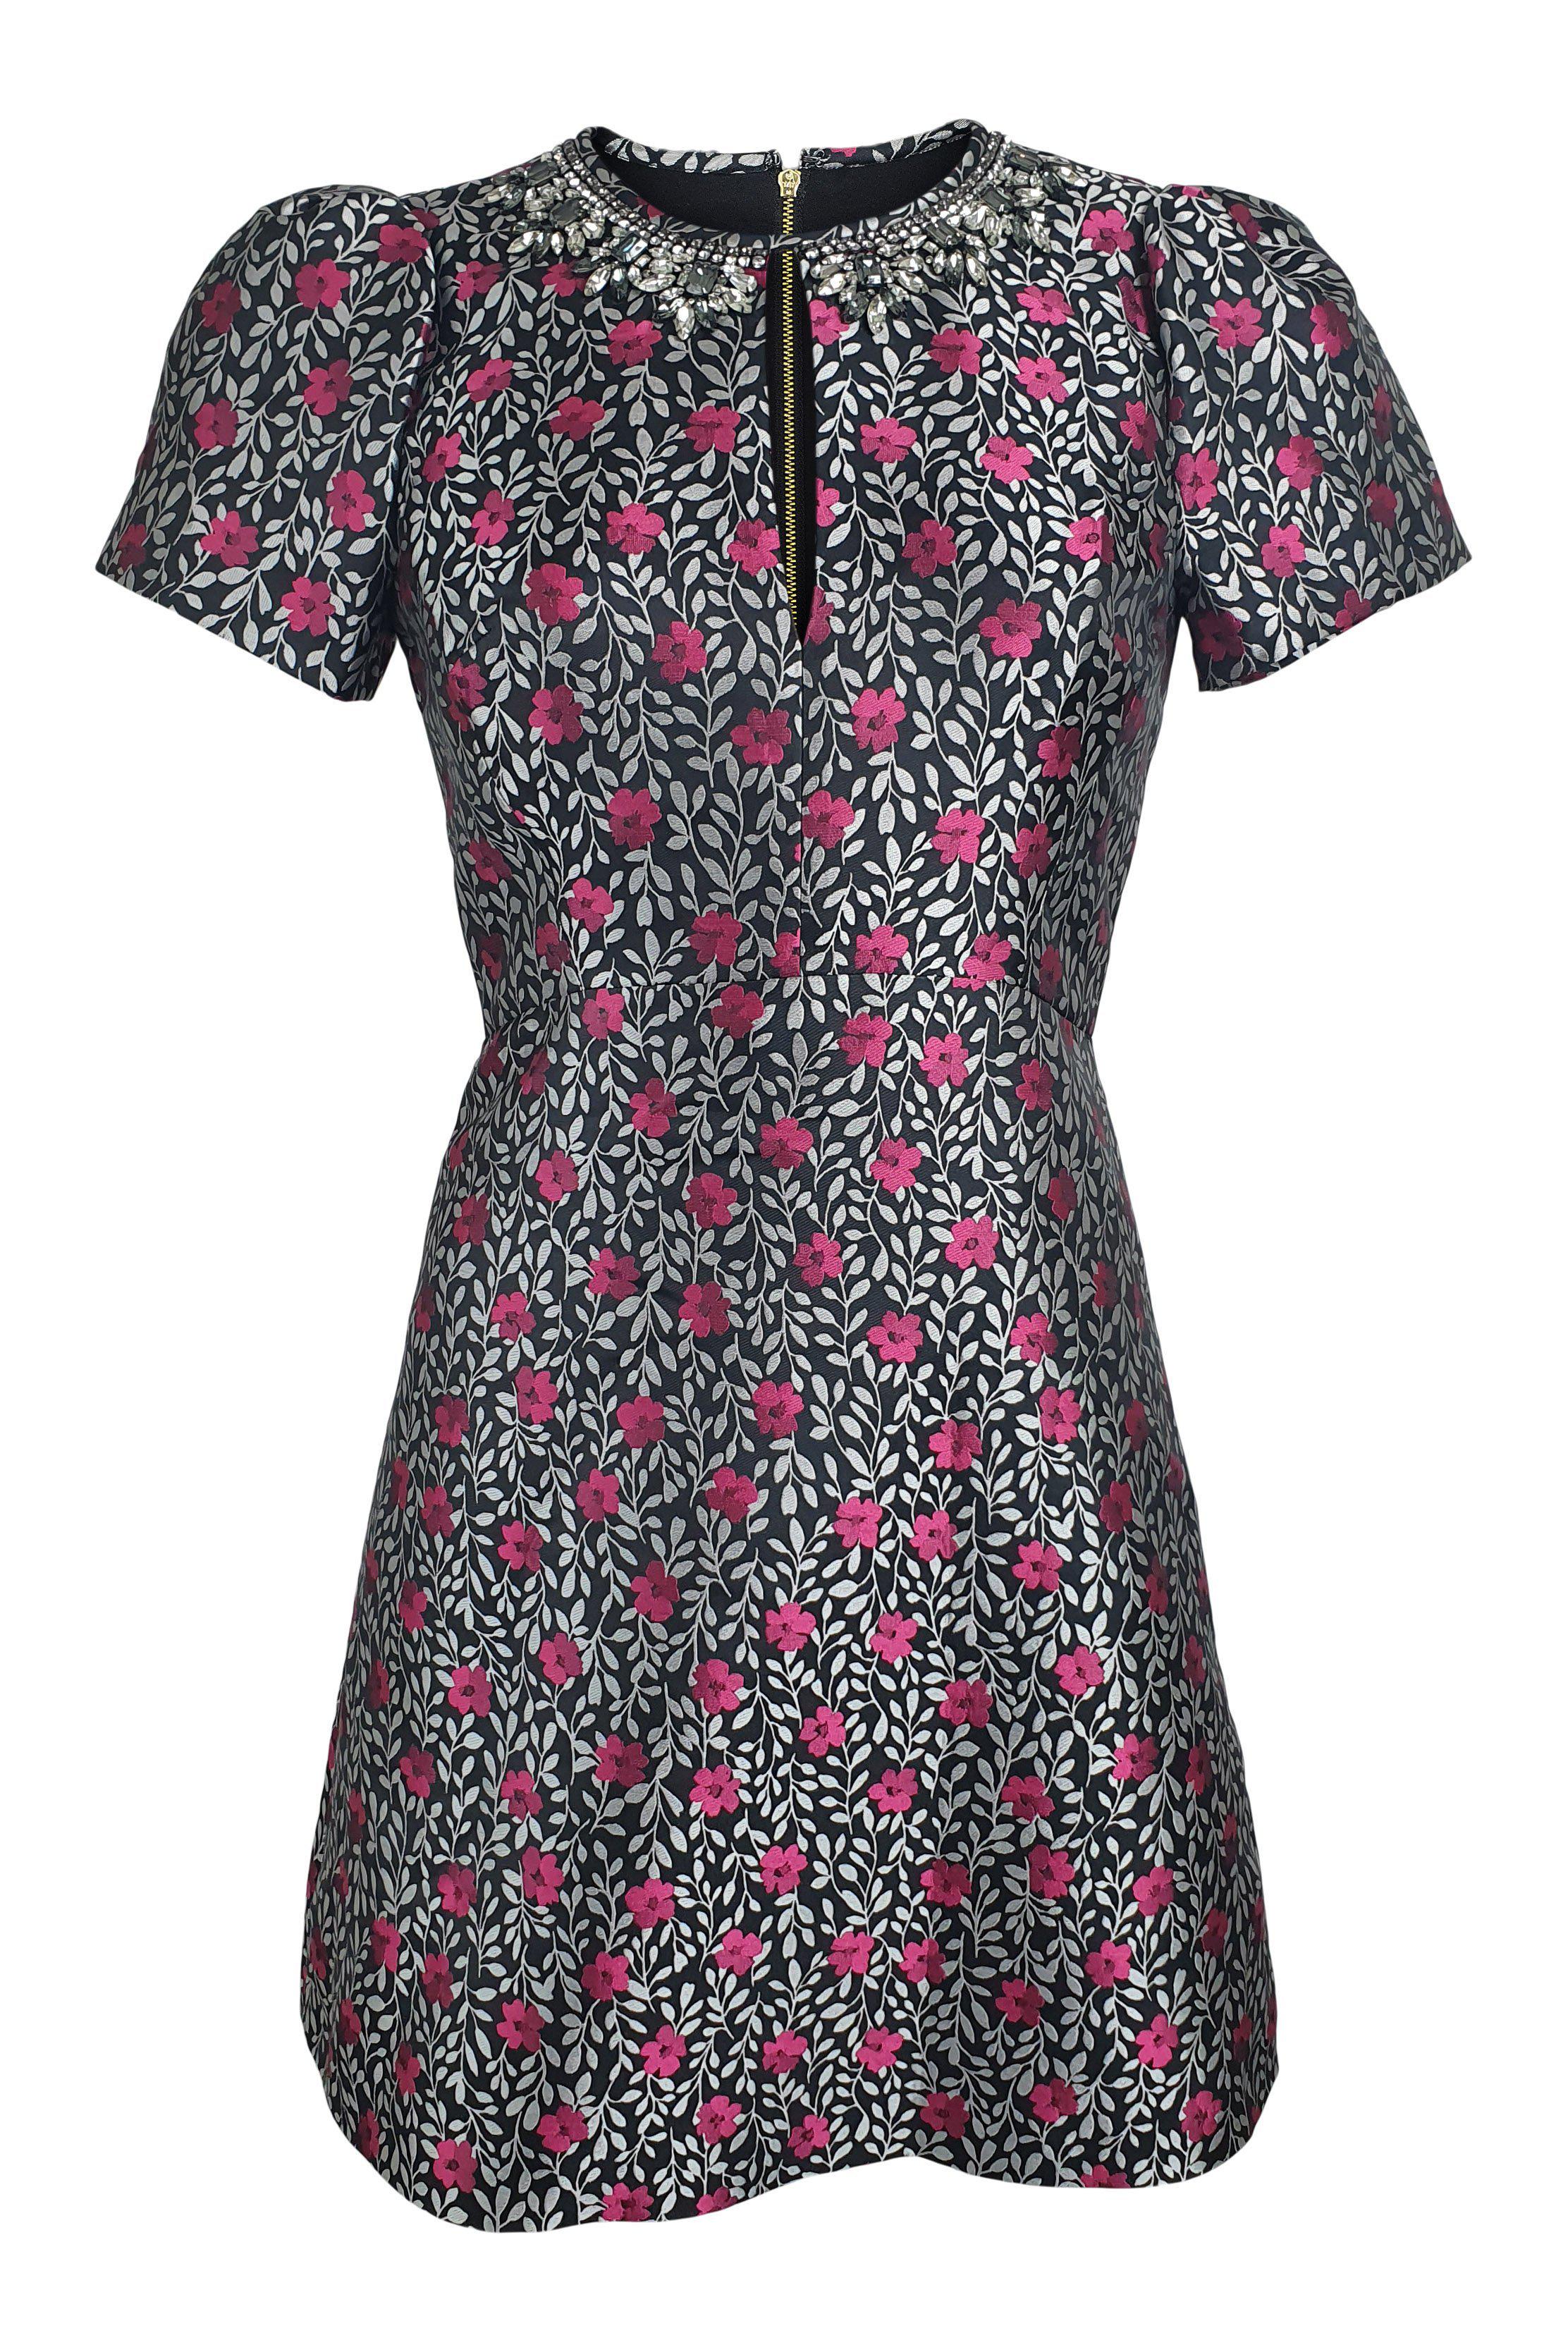 Floral Lace Dress  Kate Spade New York